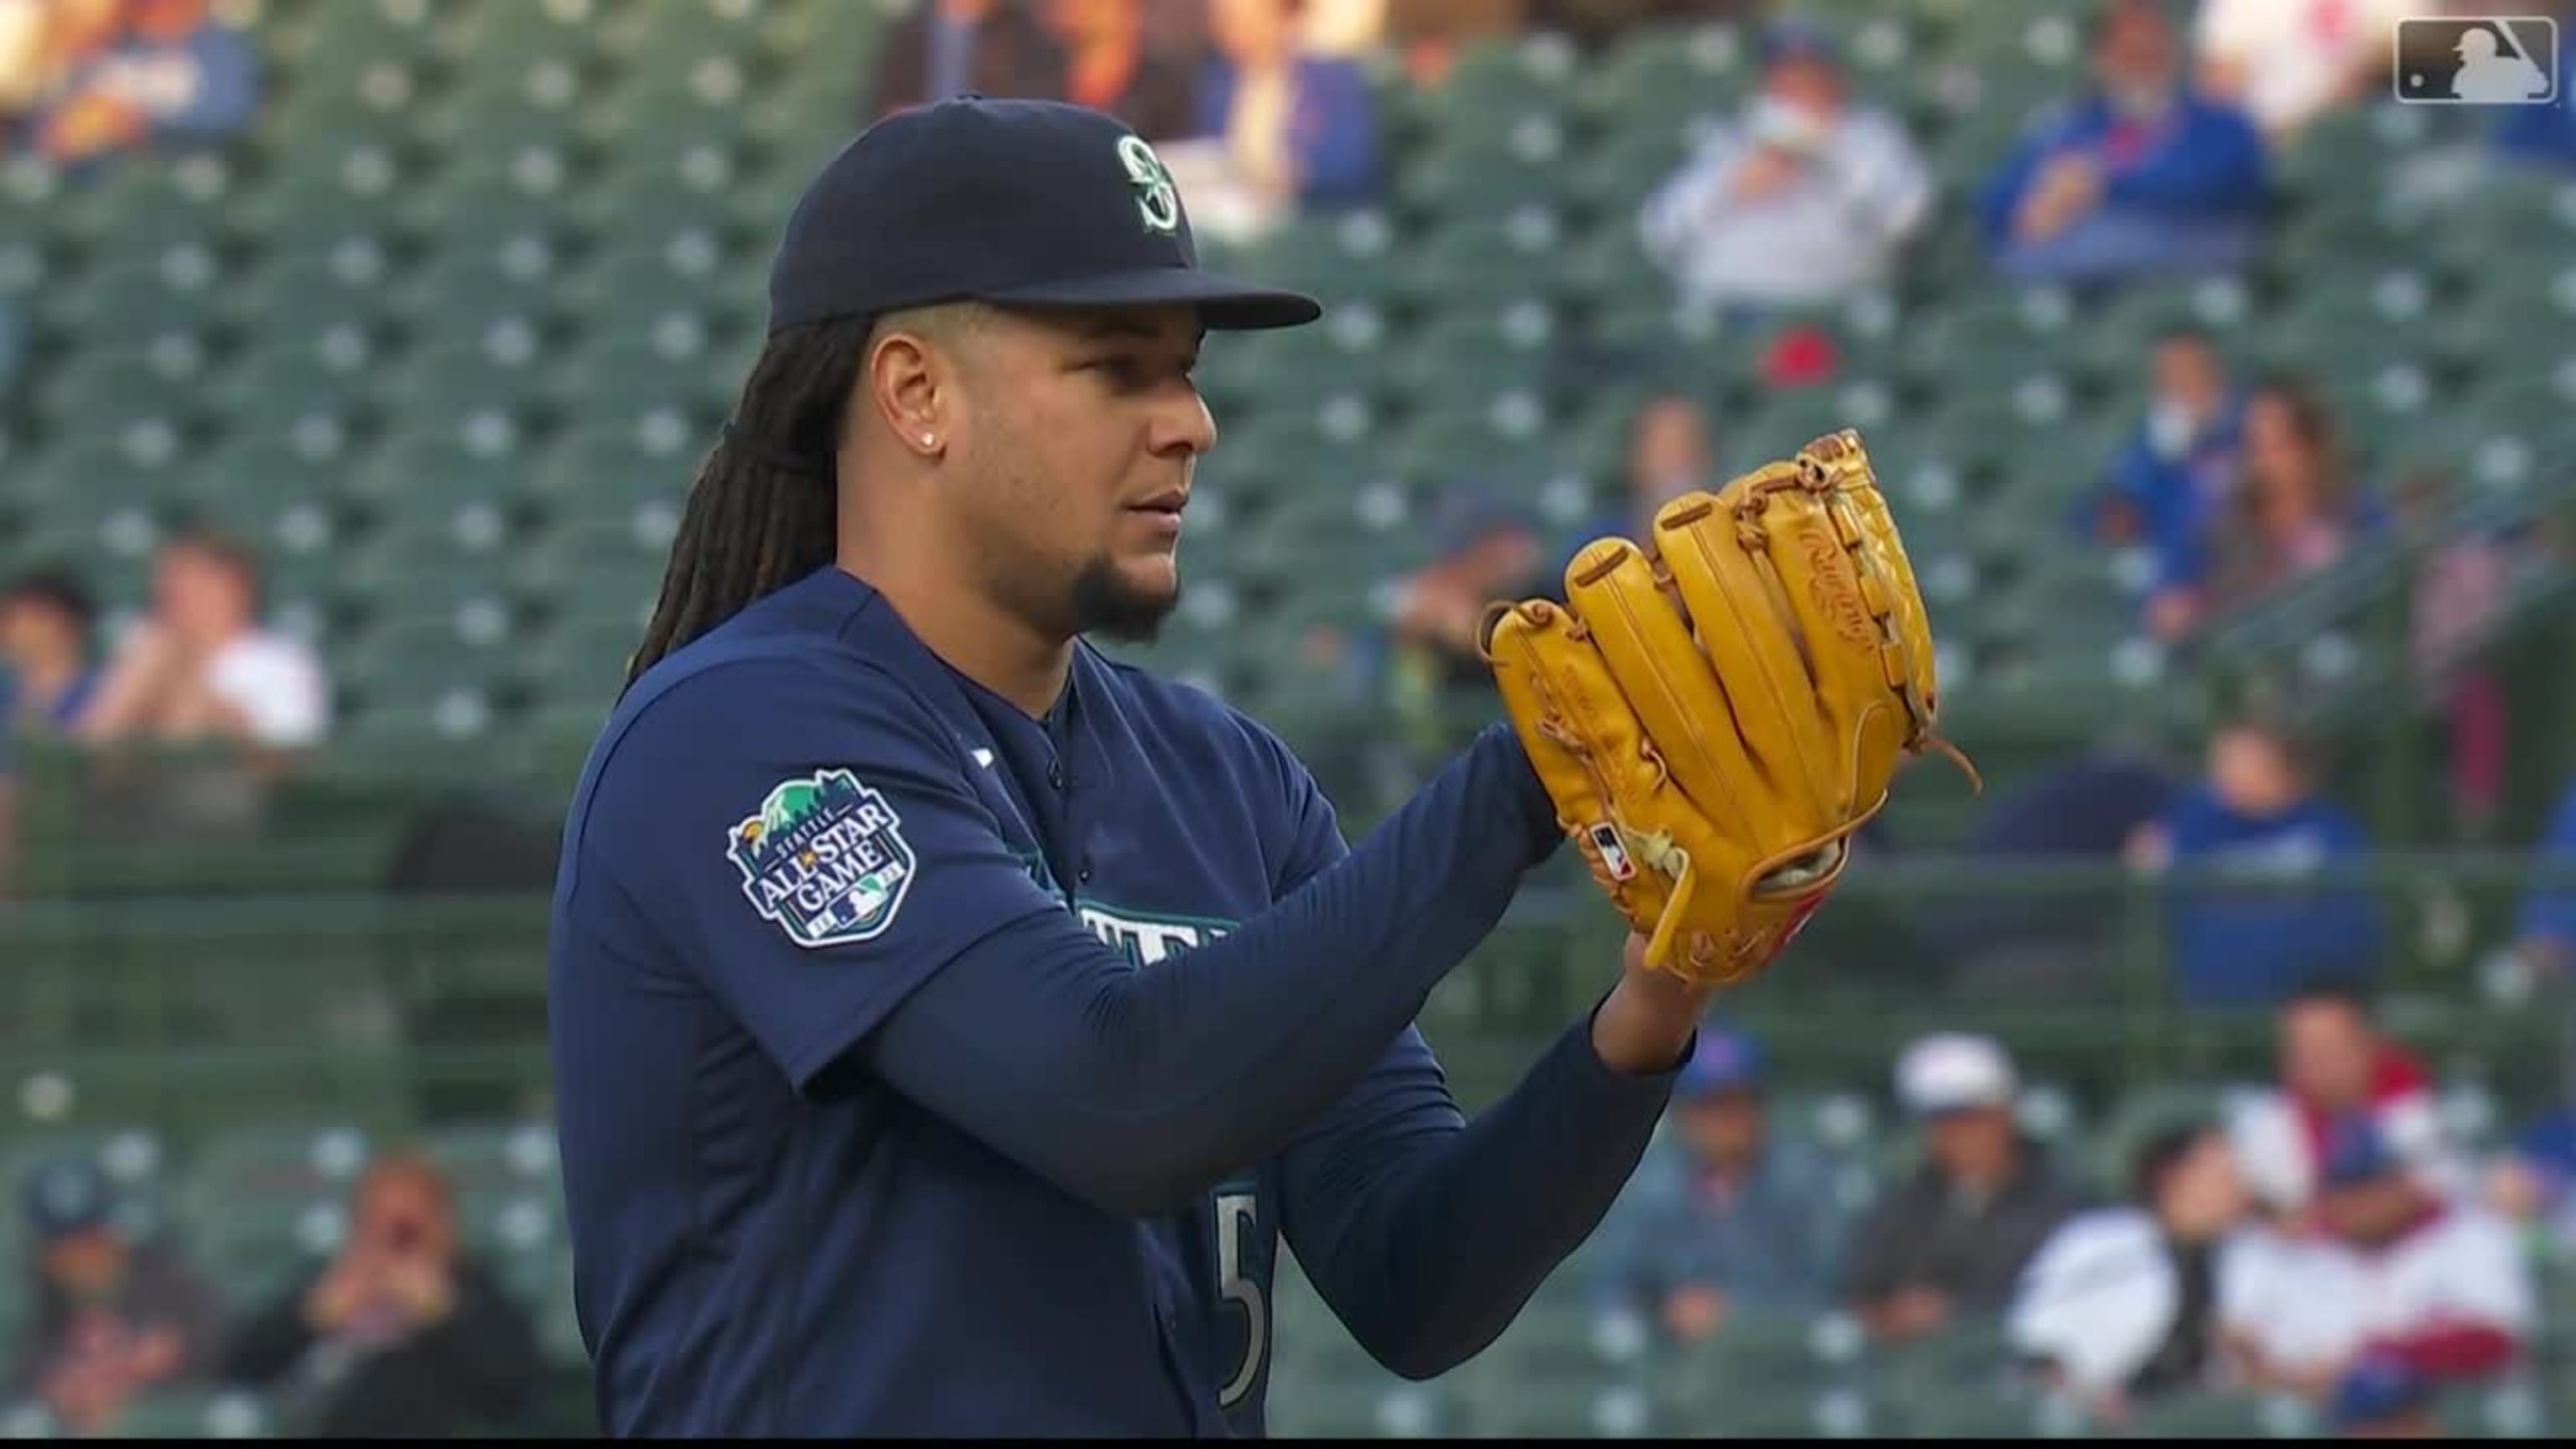 Rock the ballpark: Luis Castillo rock solid as Mariners take